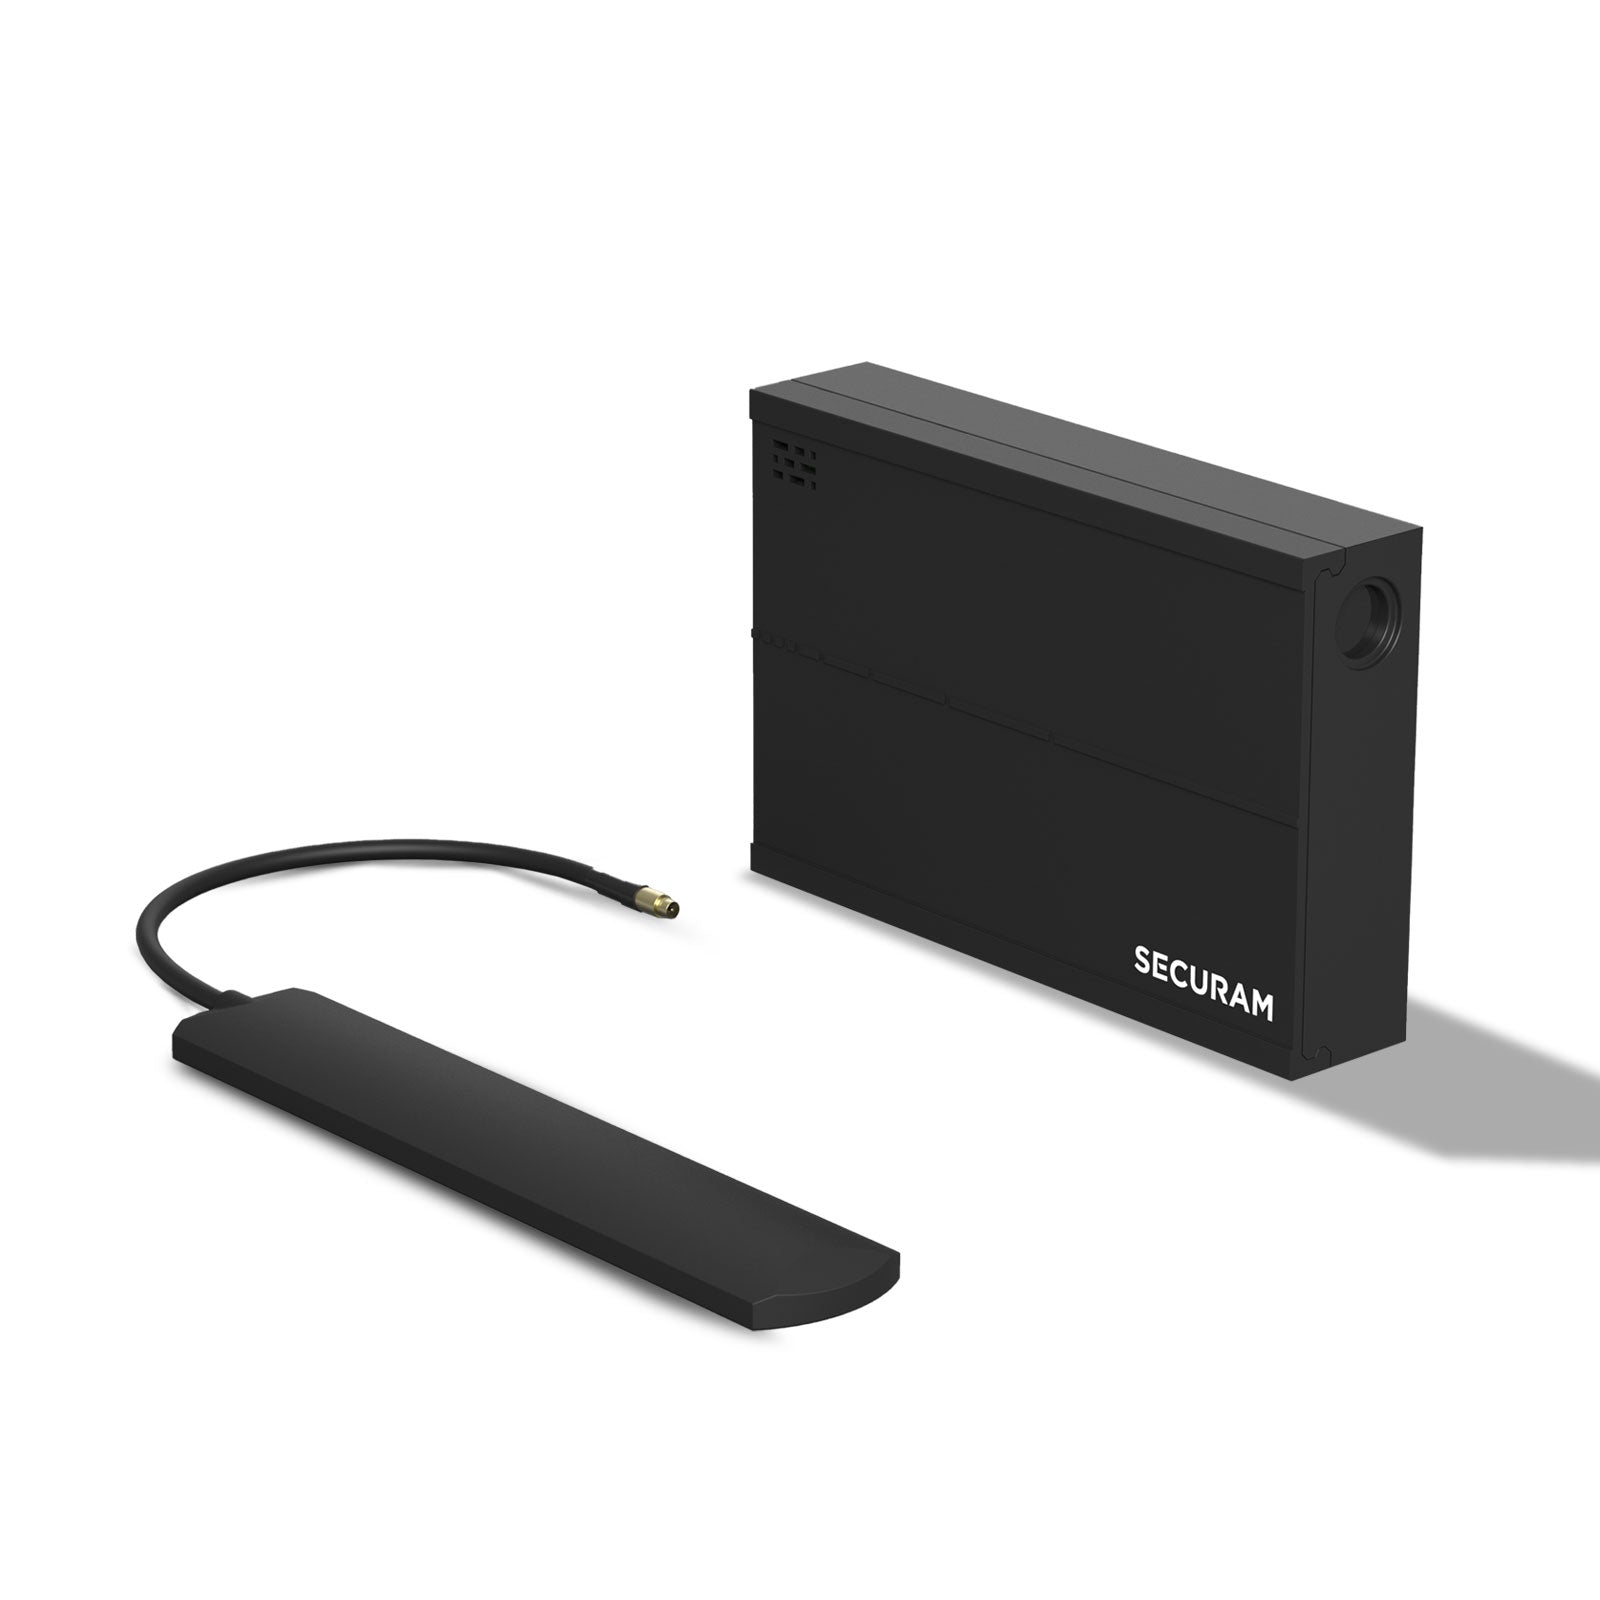 A black Safe Monitor box with a cord attached to it from SECURAM.